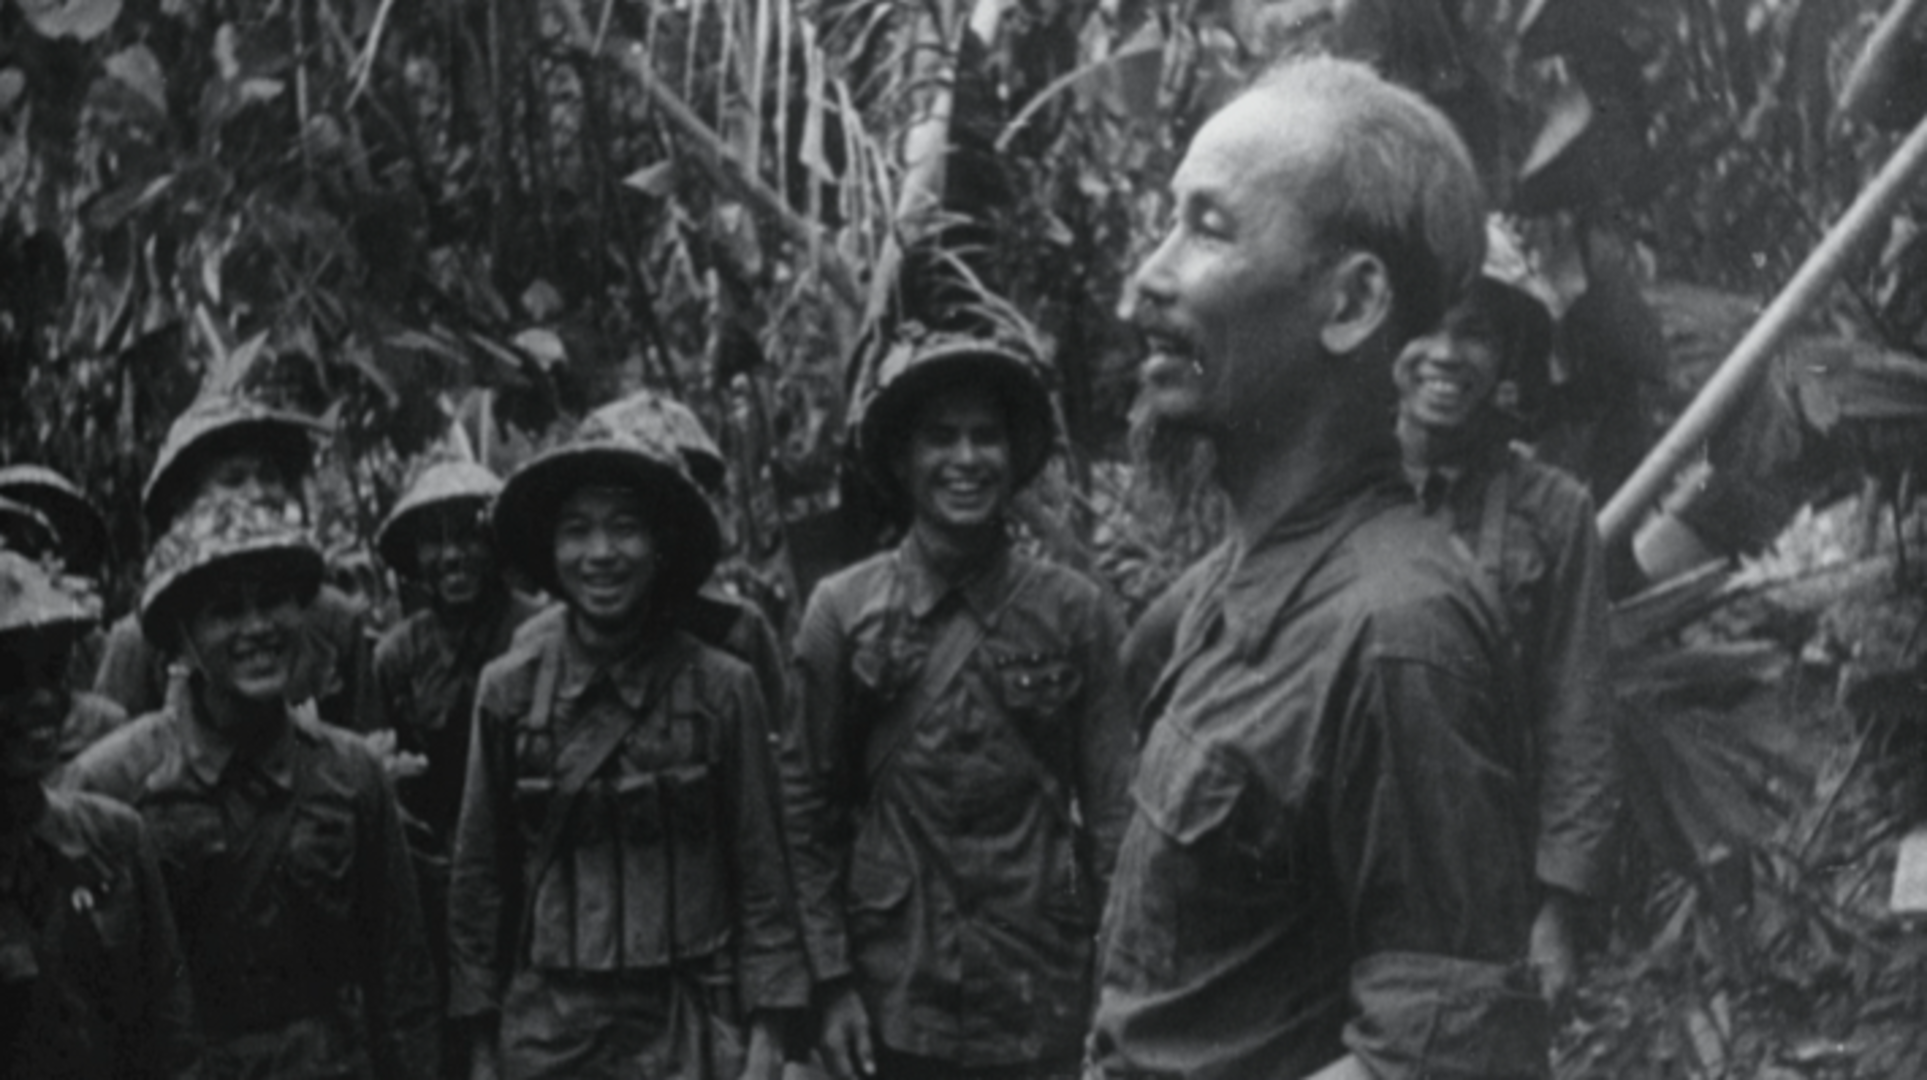 HISTORY LESSONS: Who was the real Ho Chi Minh?